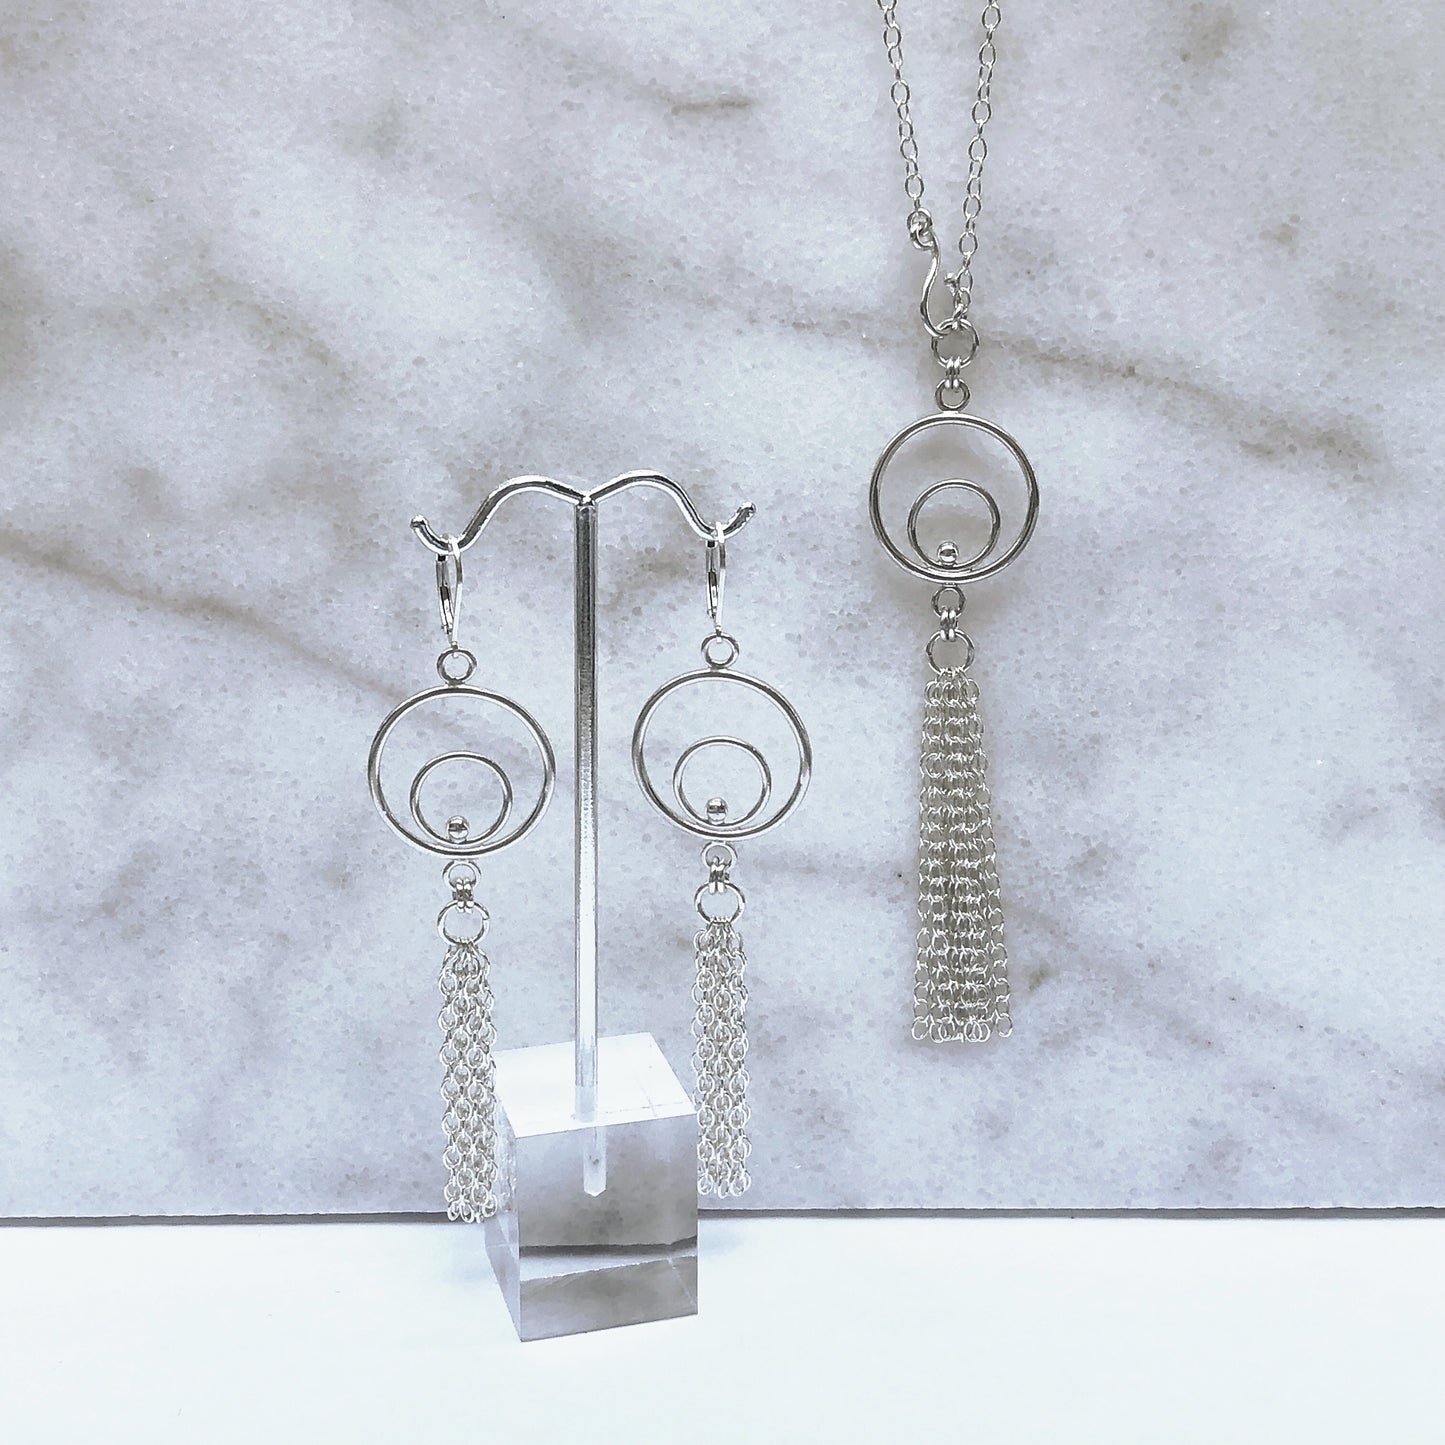 Orbital fringe earrings and matching necklace